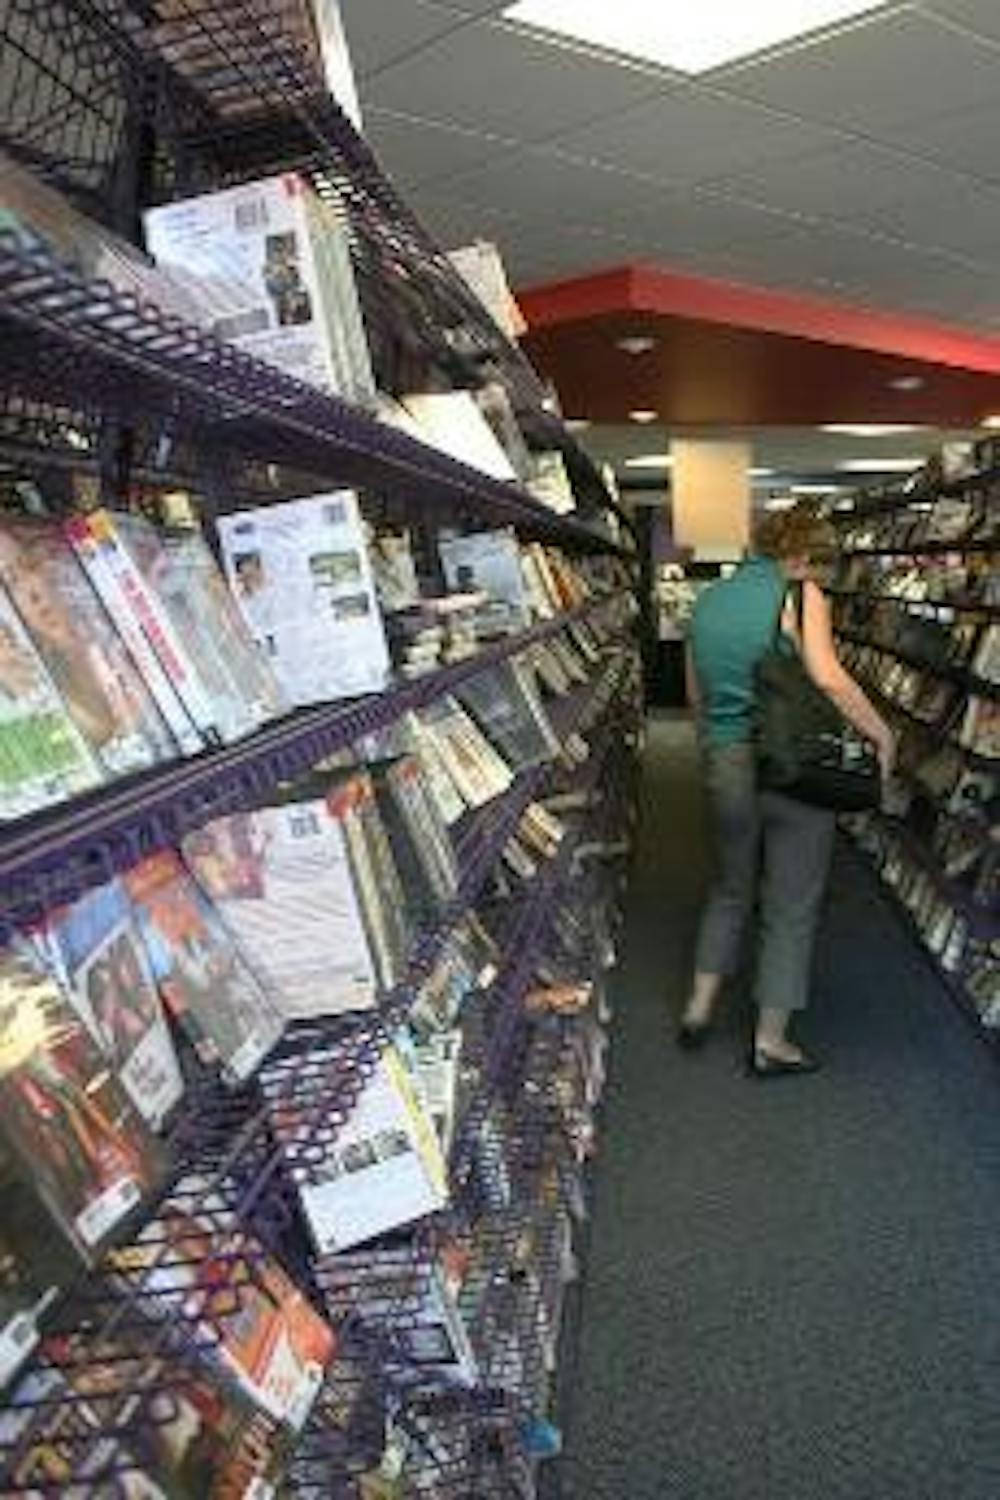 MOVIE SELL OUT - People browse the emptying shelves at Hollywood Video in Tenleytown. All movies and merchandise are being sold for low prices. The store will be closing in the near future because the cost of the building's rent recently doubled.